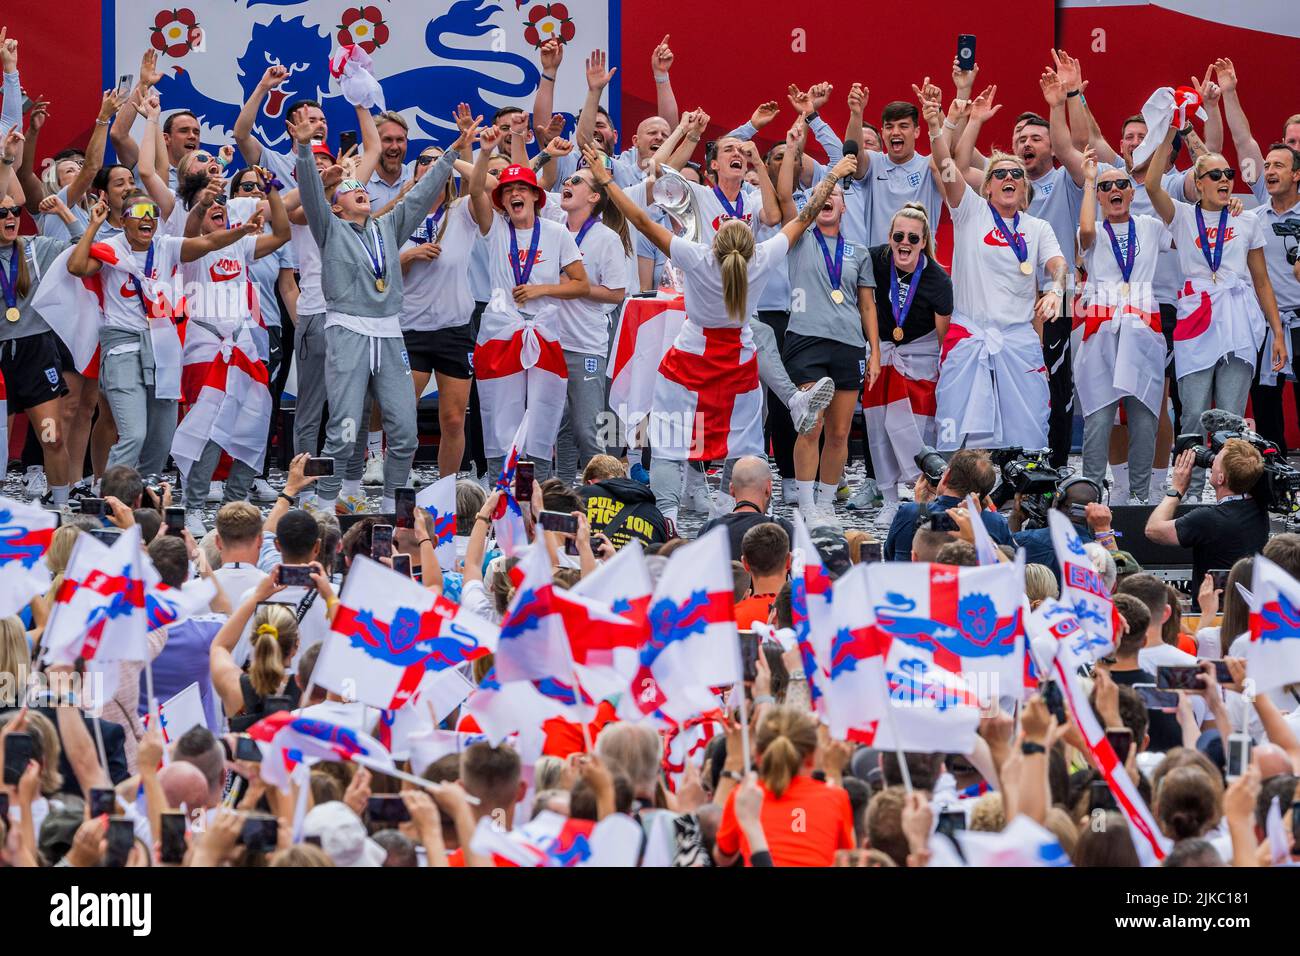 London, UK. 1st Aug, 2022. England celebration after winning the UEFA Women's EURO 2022 final. The event in Trafalgar Square was organised by the FA, the Mayor of London Sadiq Khan, and tournament organisers. It offered free access for up to 7,000 supporters. Credit: Guy Bell/Alamy Live News Stock Photo